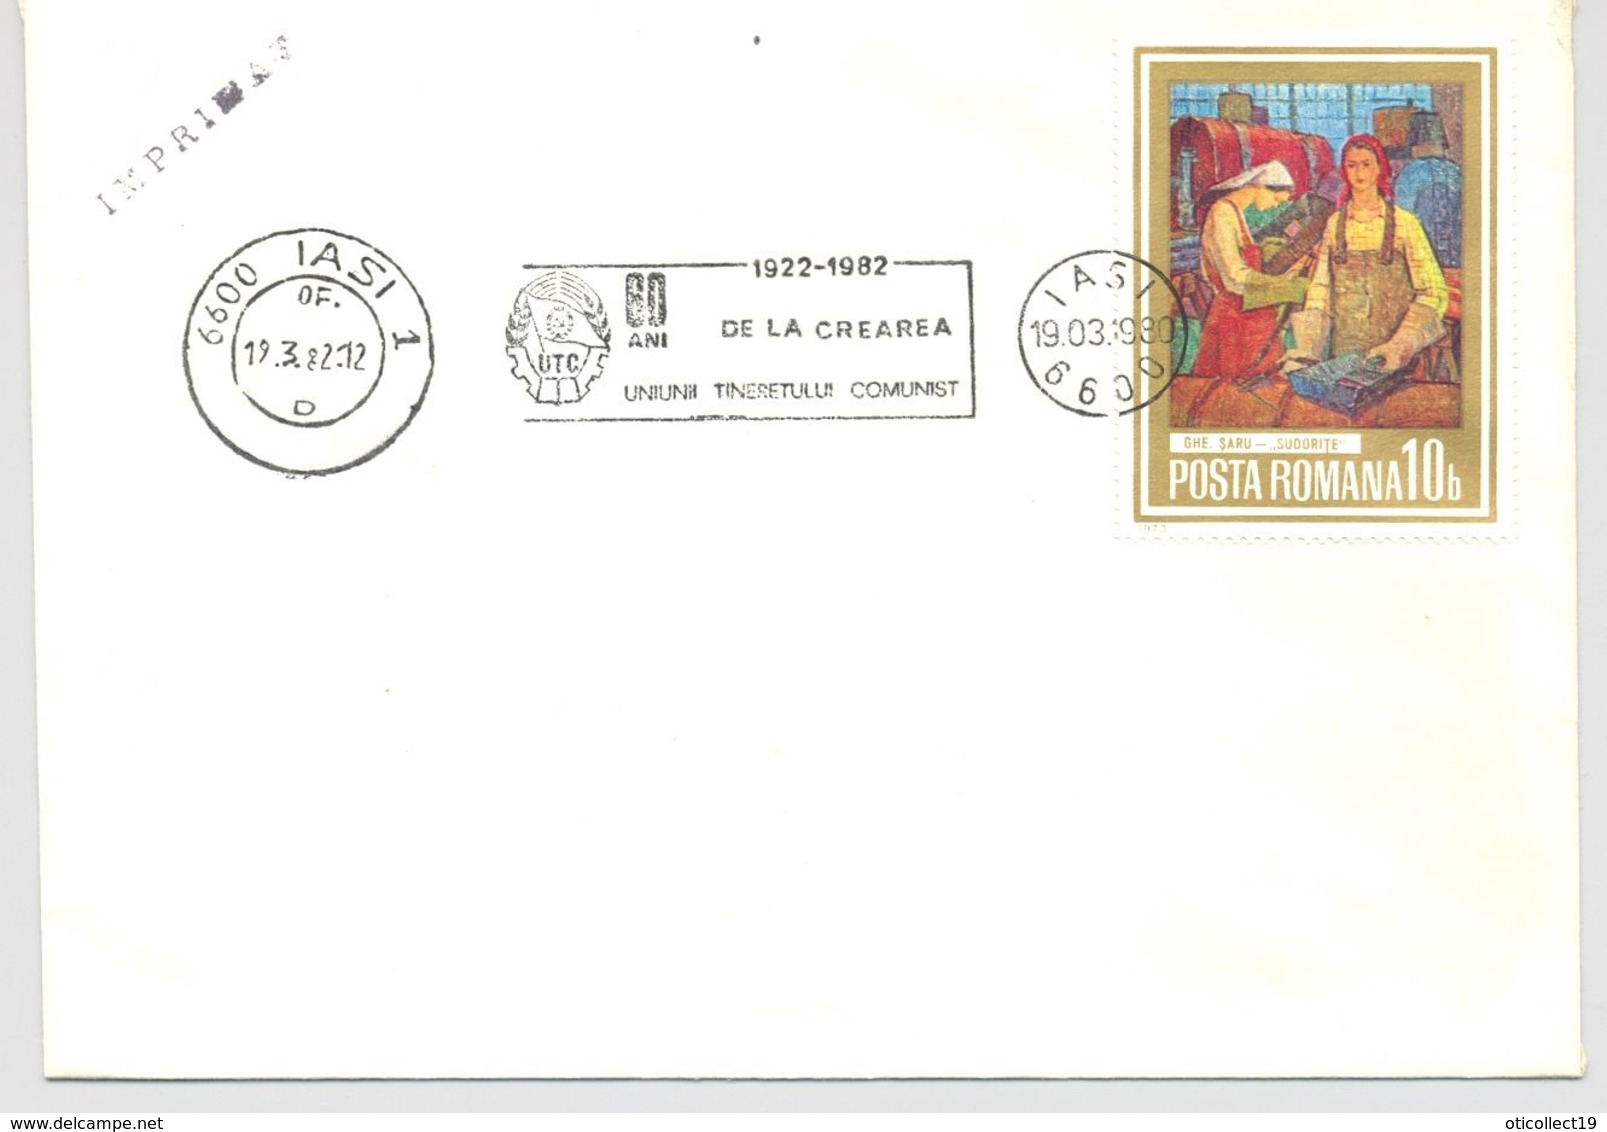 ROMANIAN YOUTH COMMUNIST ORGANIZATION ANNIVERSARY, SPECIAL POSTMARK ON COVER, PAINTING STAMP, 1982, ROMANIA - Storia Postale